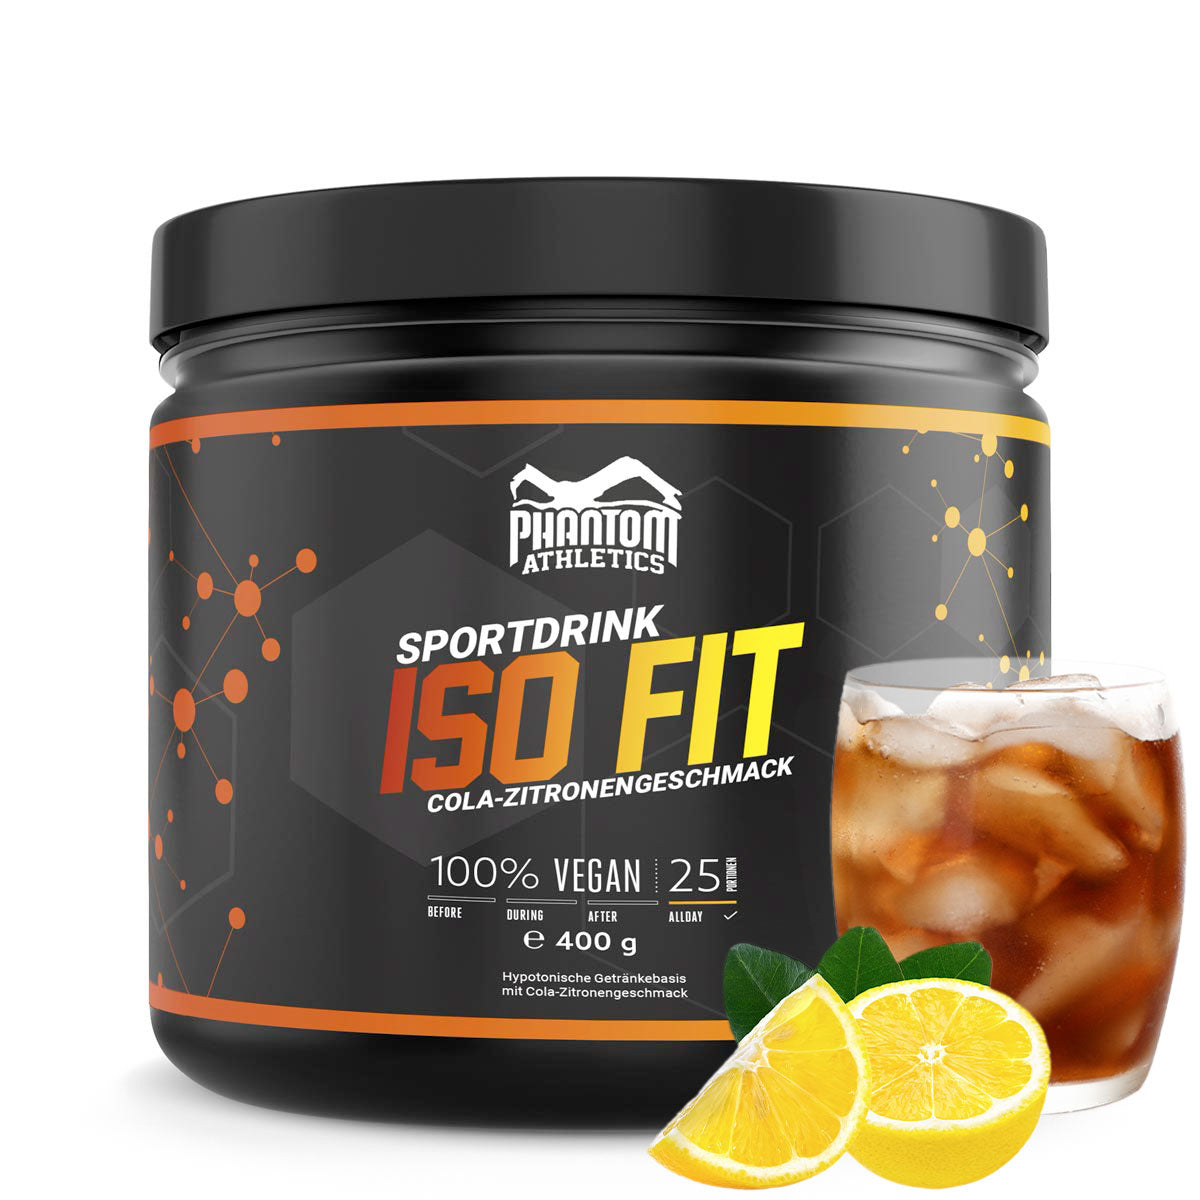 The Phantom ISO FIT nutritional supplement provides you with everything you need for martial arts training. Now with a delicious cola-lemon flavor.